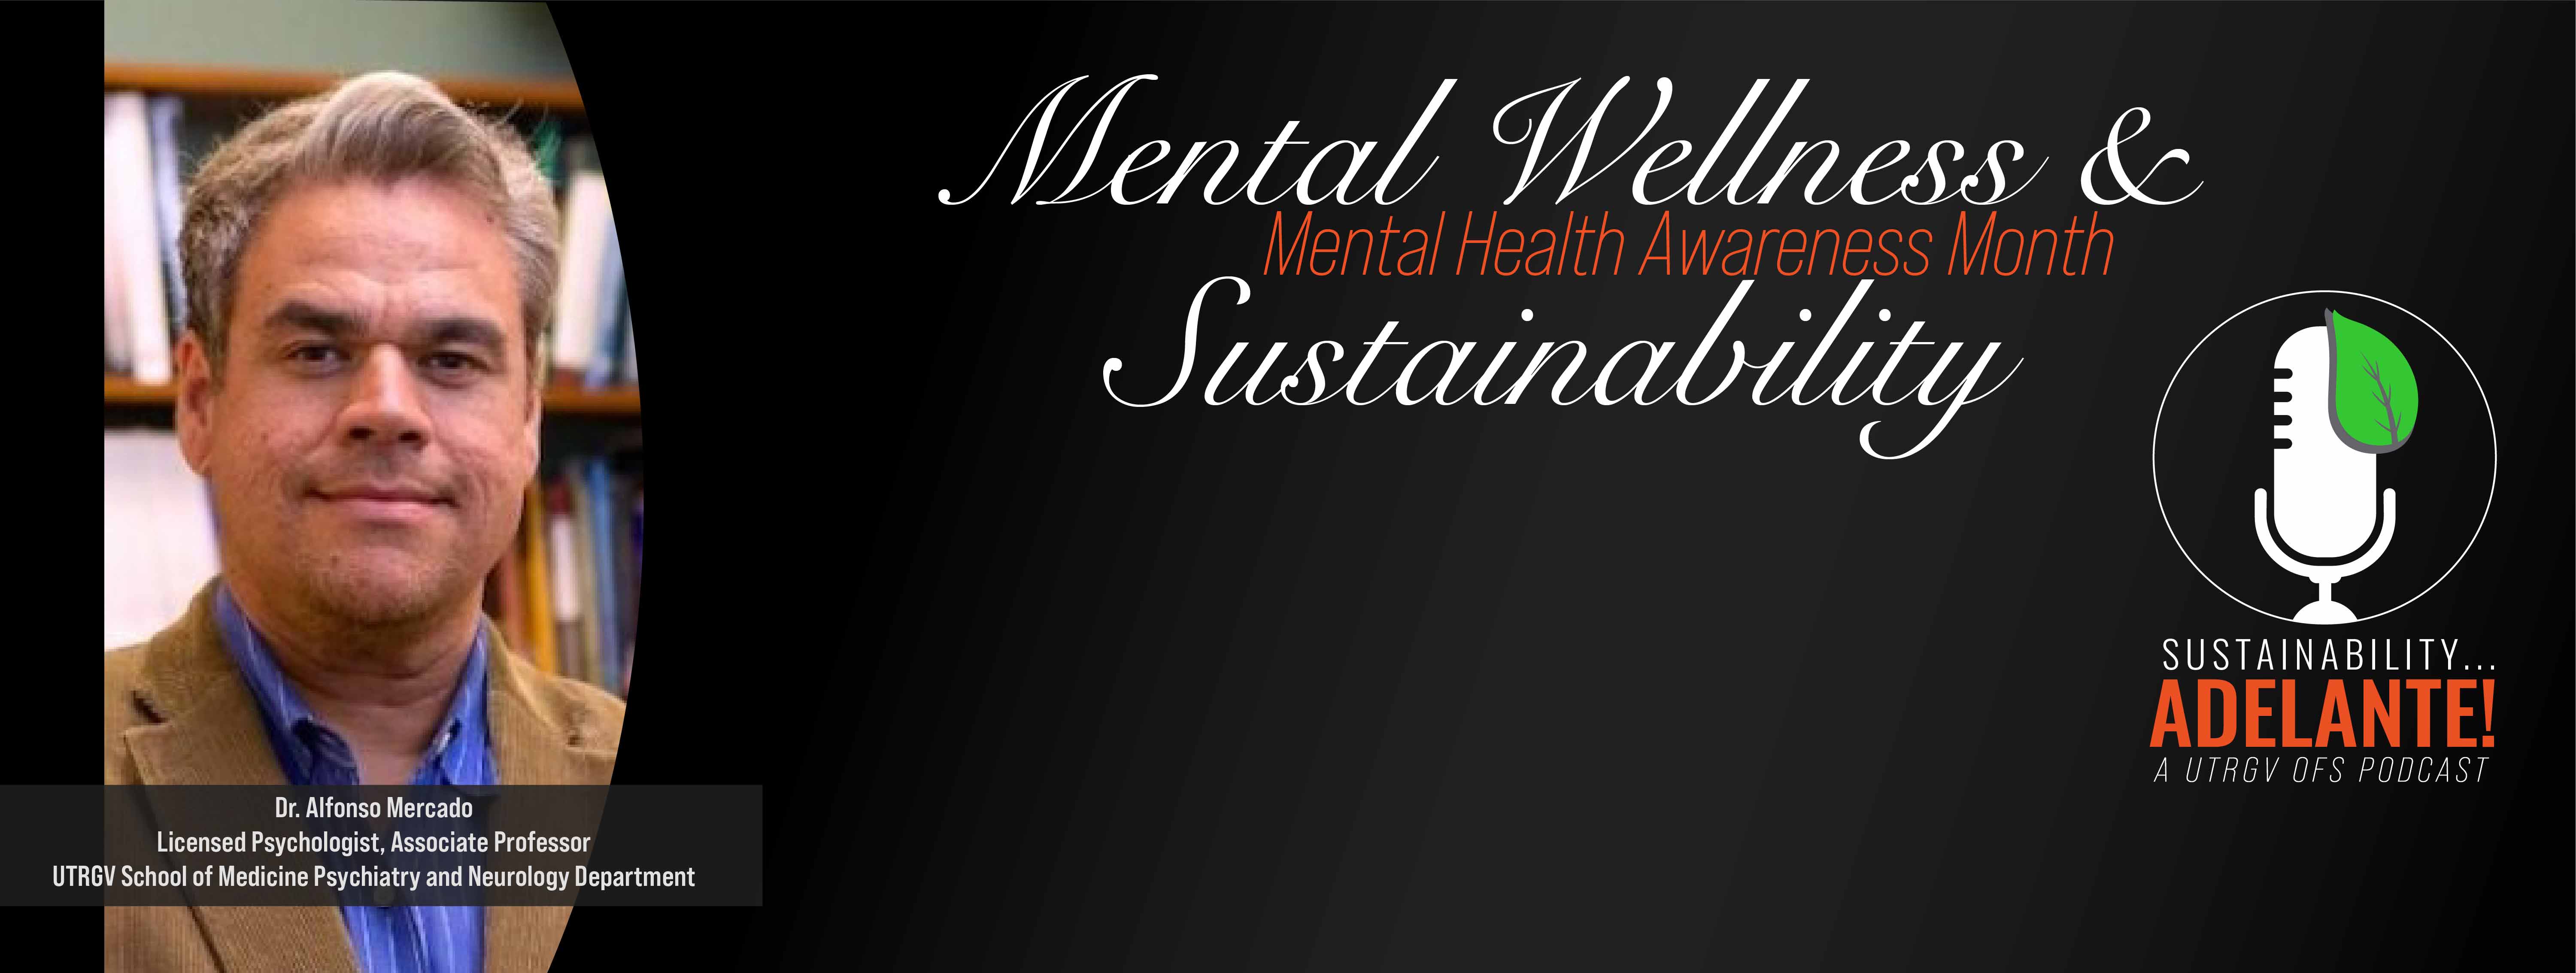 Mental Wellness and Mental Health Awareness Month Sustainability Podcast with Dr. Alfonso Mercado